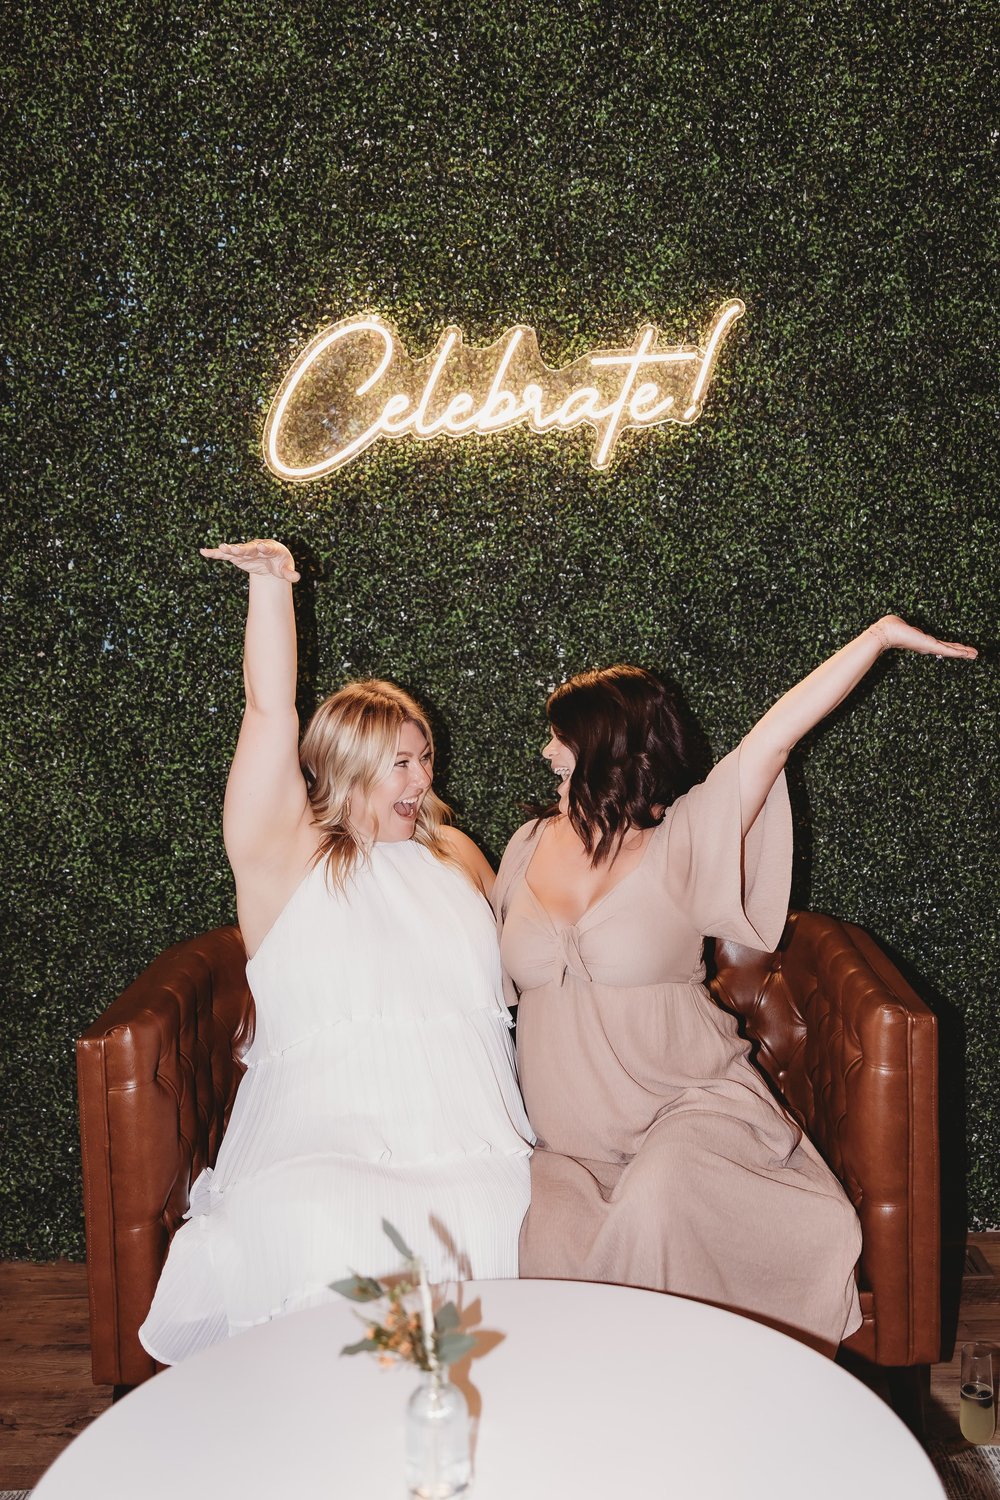  two women sit under the neon celebrate sign at parkside event room with their arms in the air and excited looks on their faces as they look at each other during brand photos for the event room   